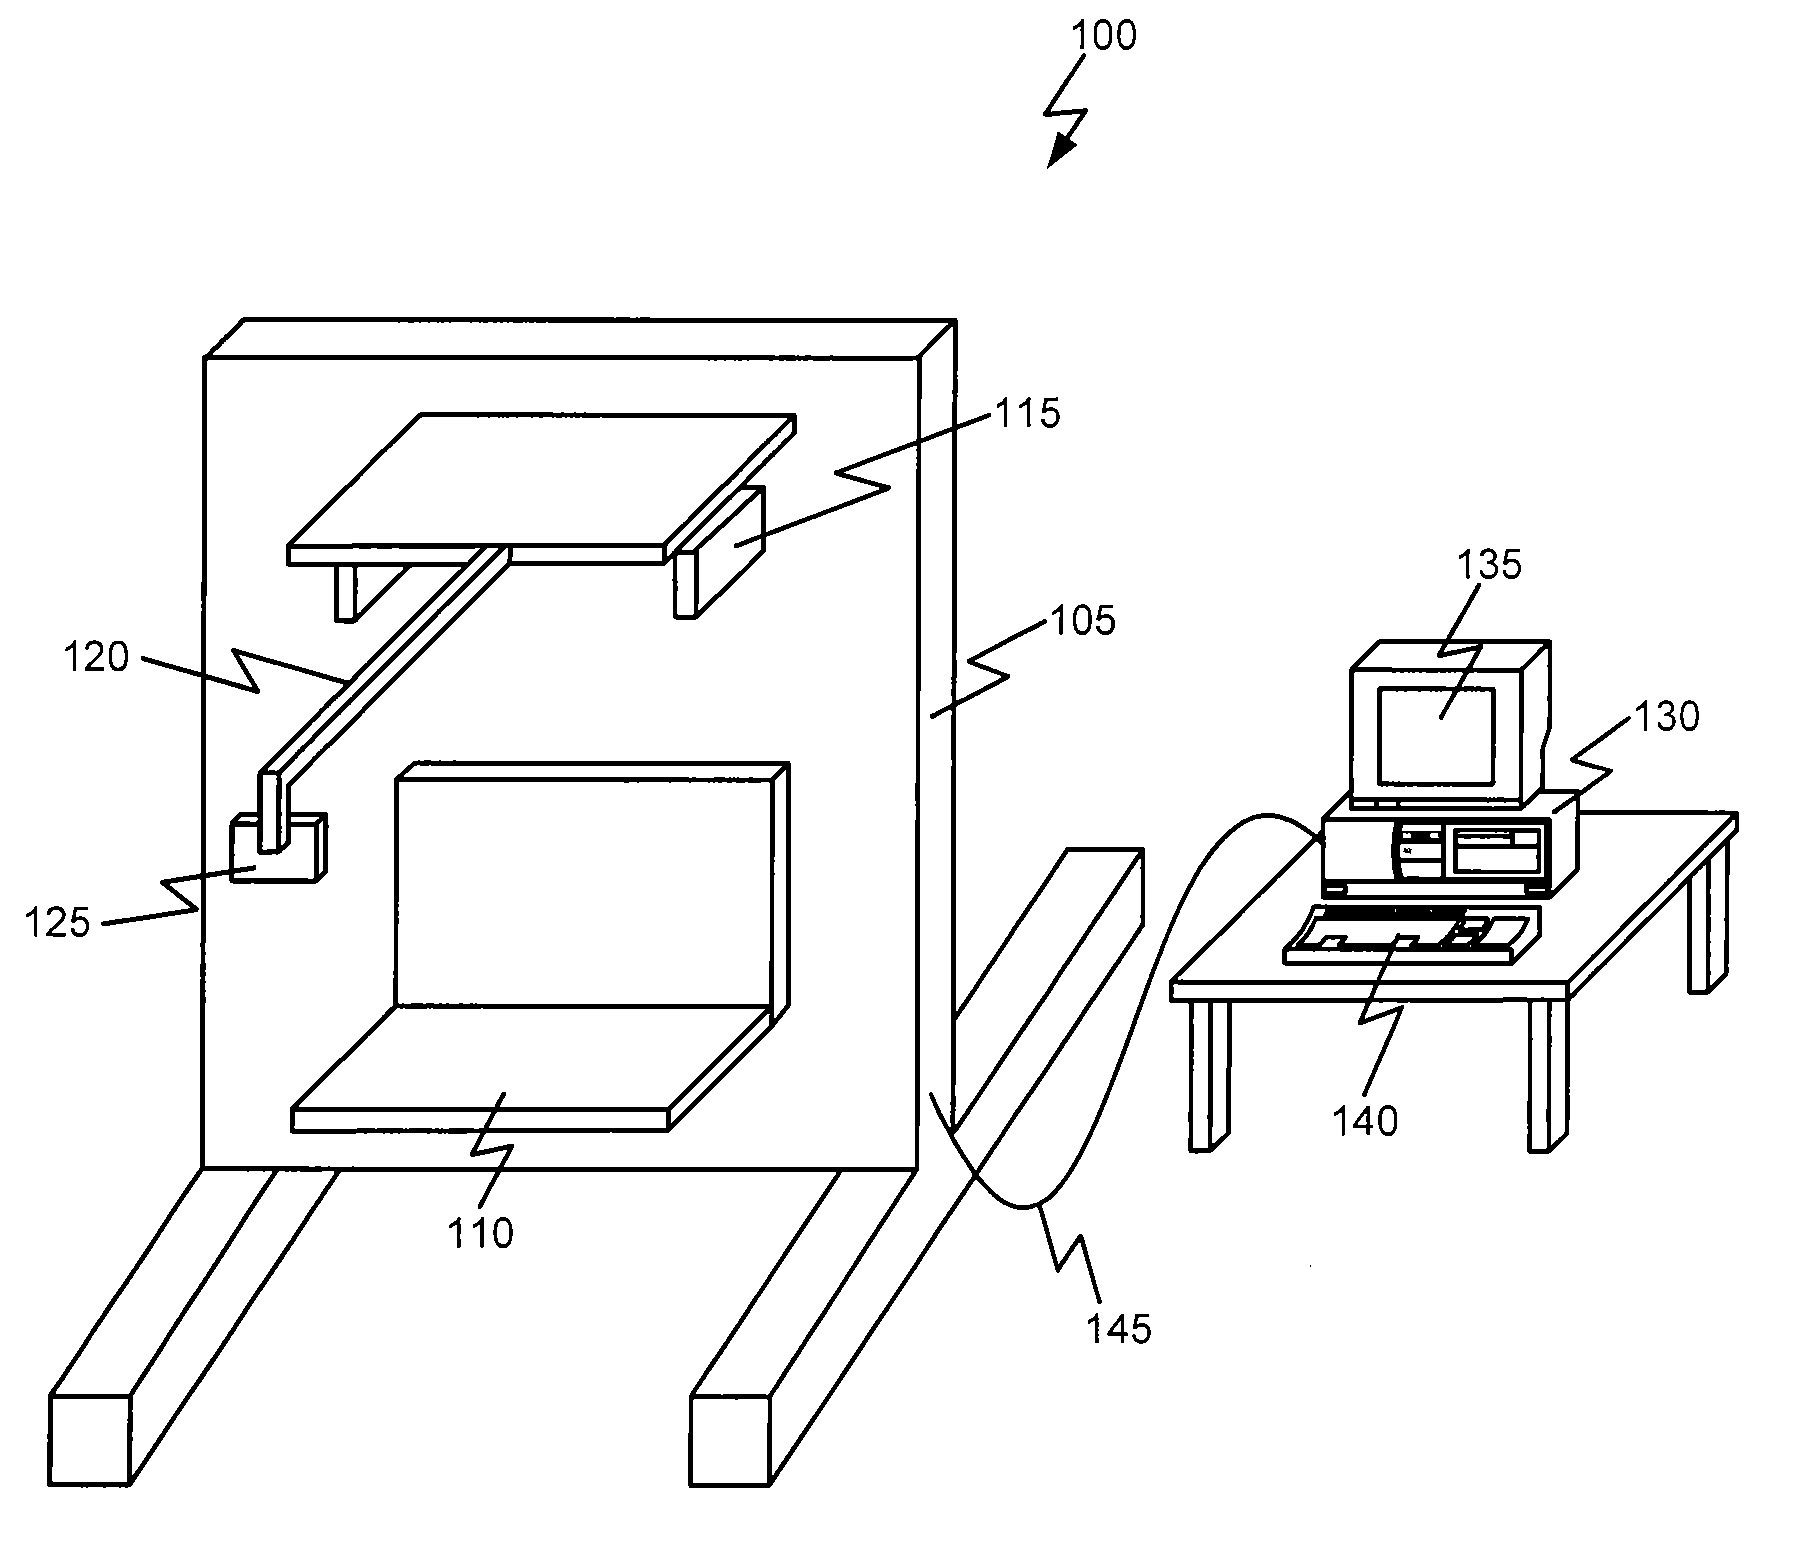 Apparatus for generating volumetric image and matching color textured external surface